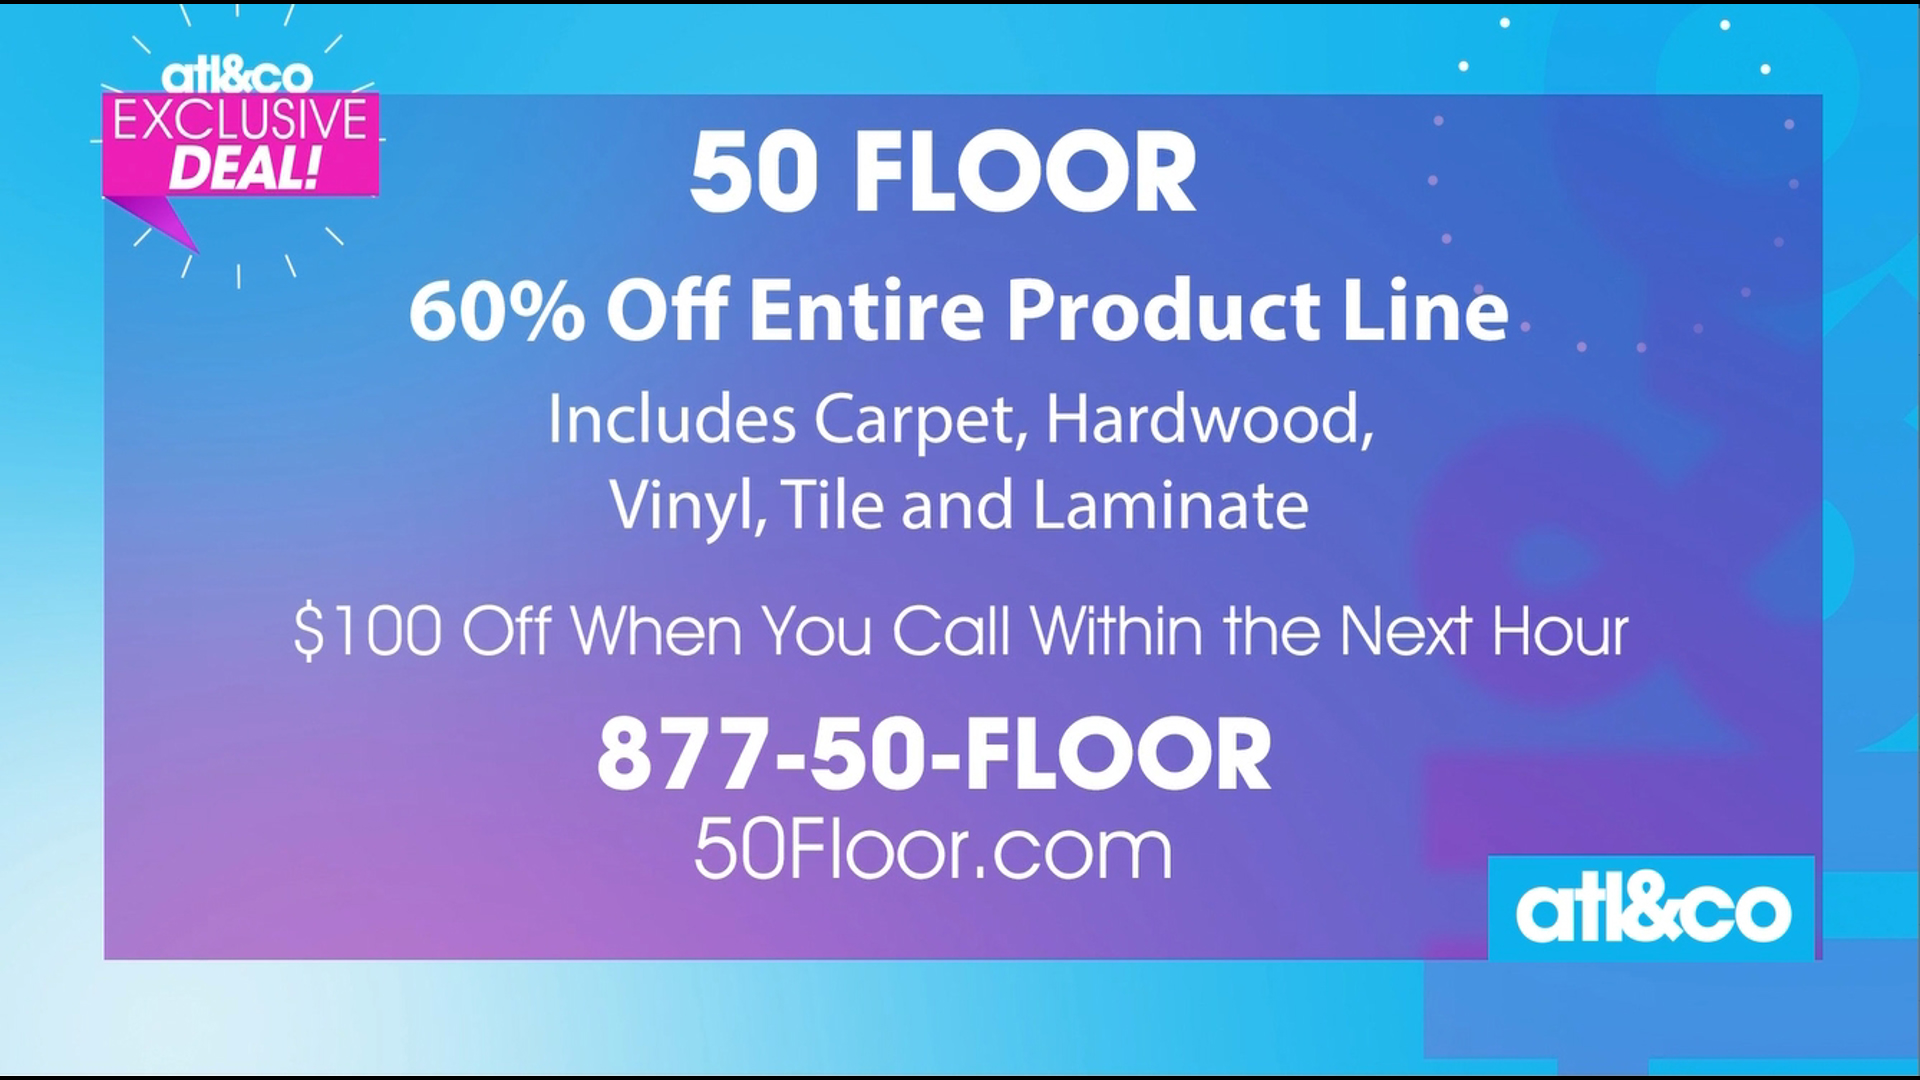 Remodel with the pros at 50 Floor and get 60% off the entire product line.